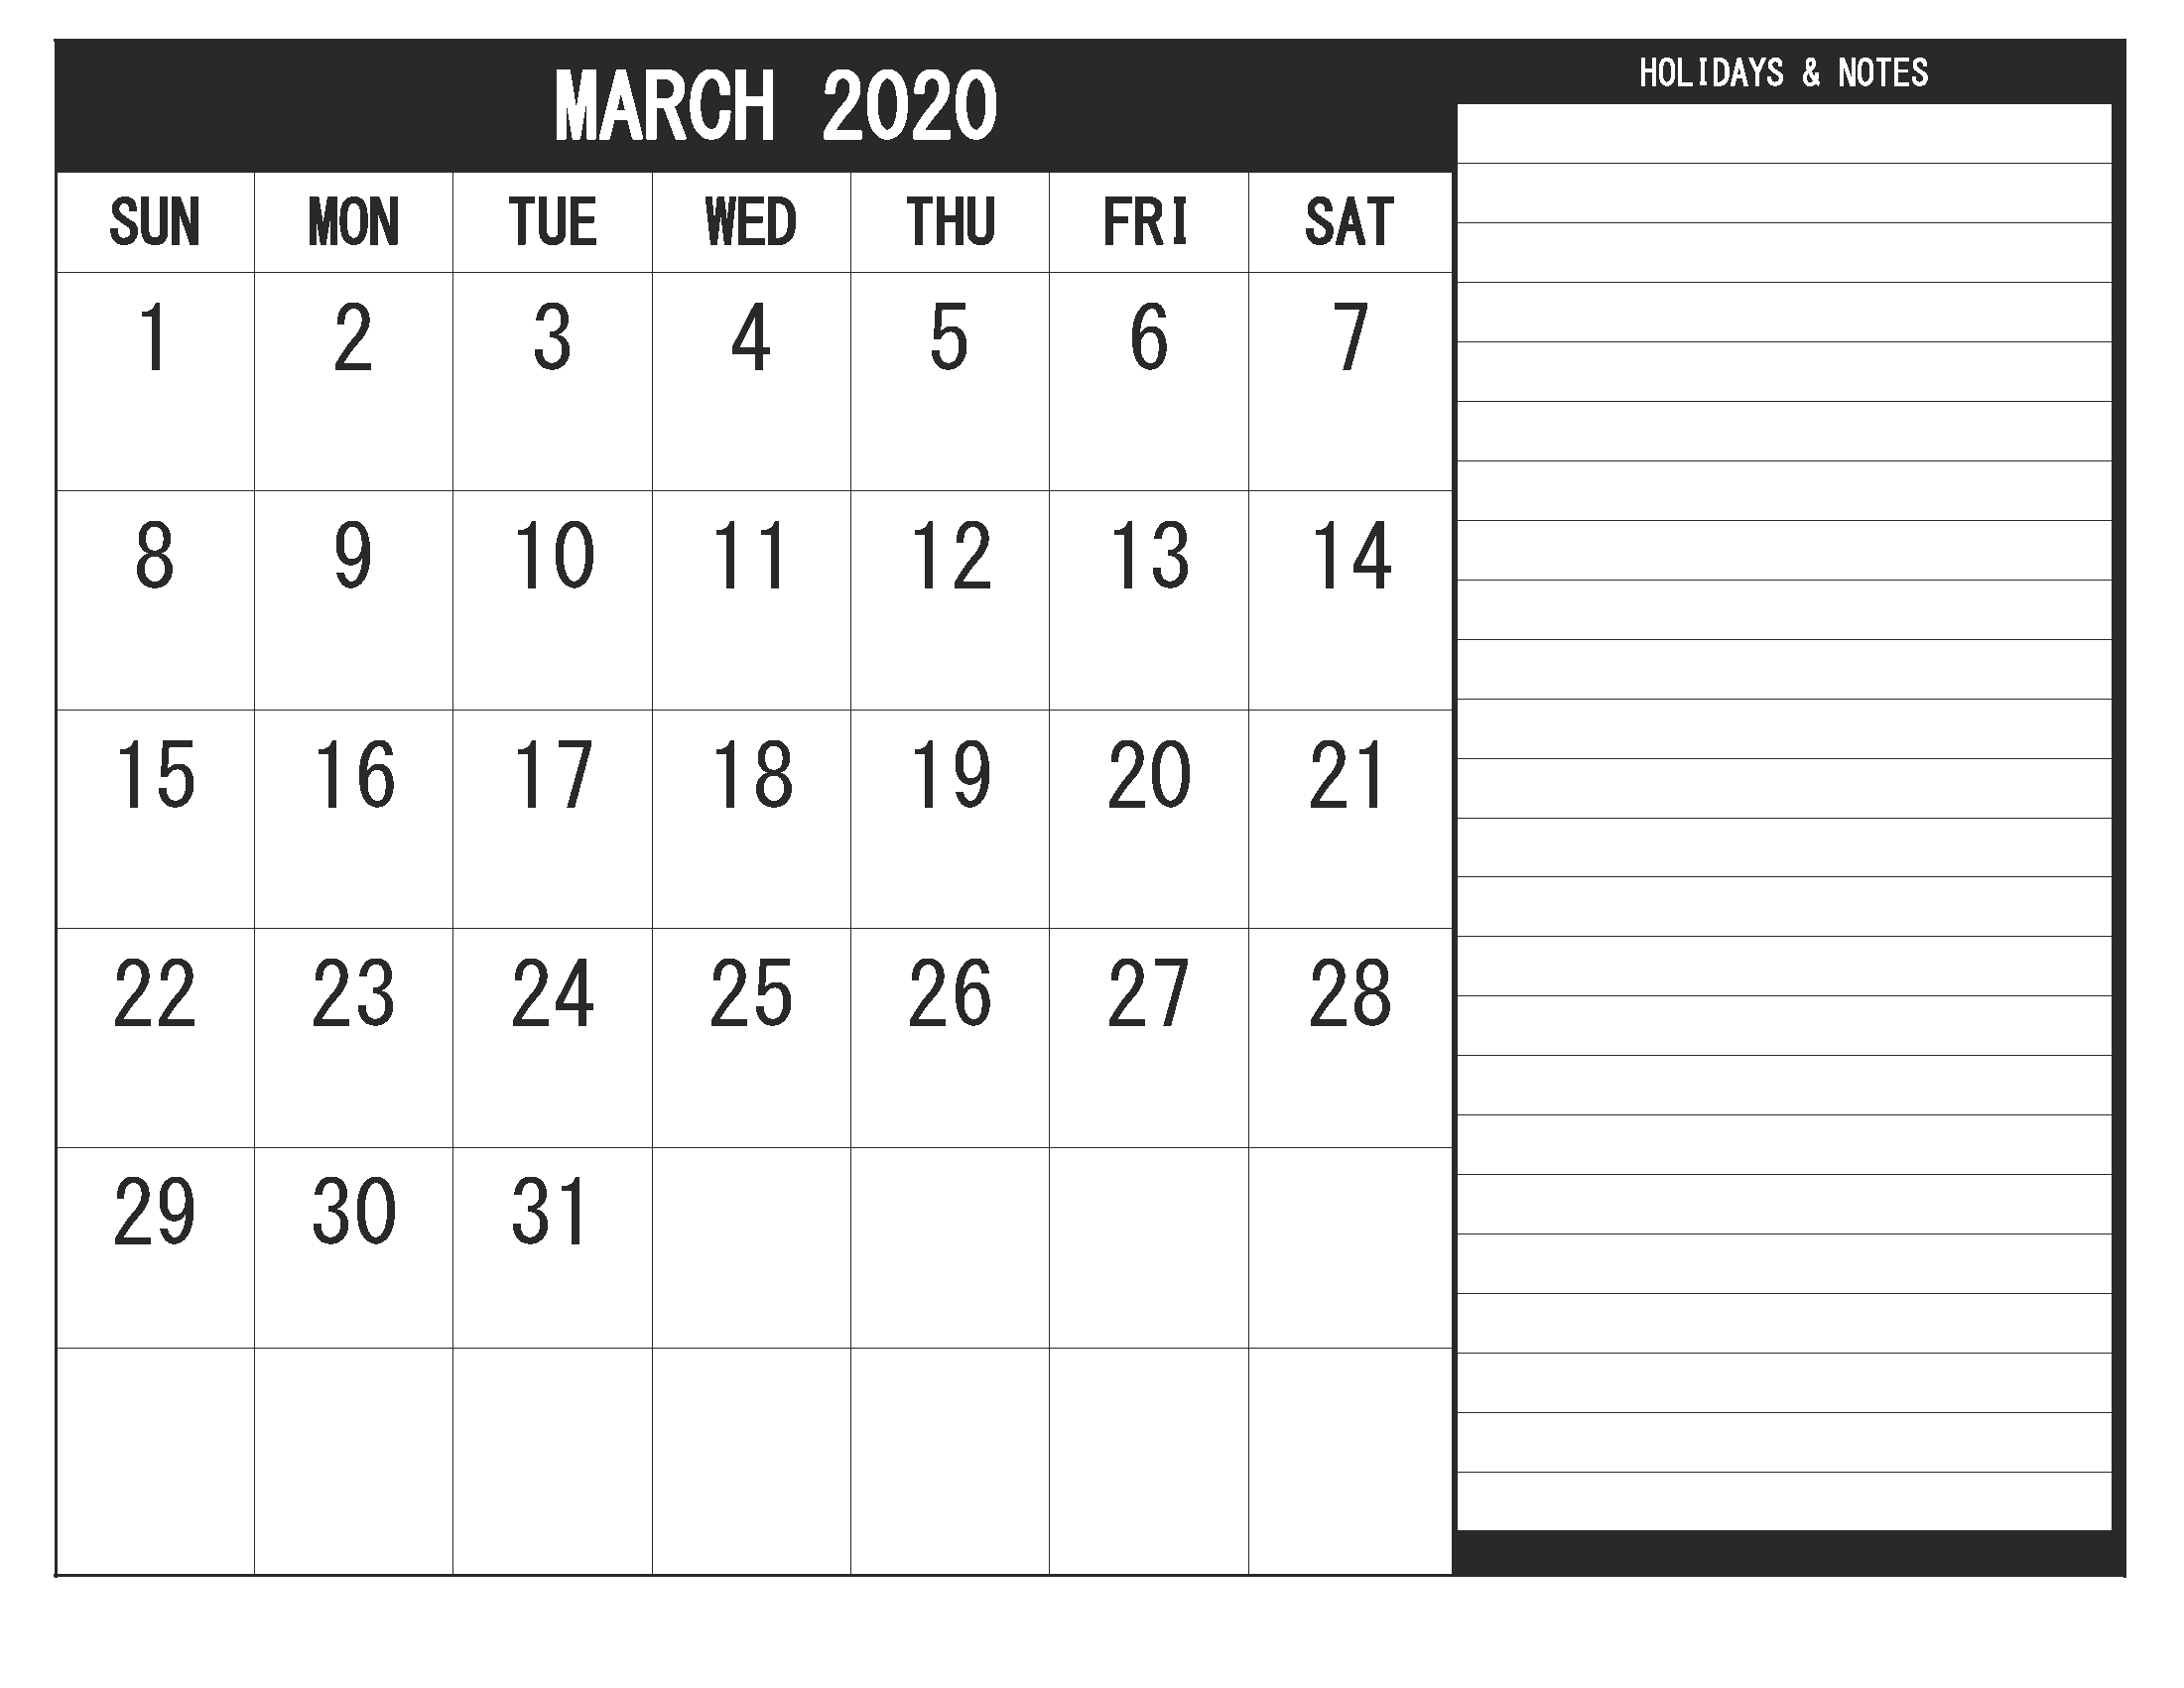 Calendar Pdf Template from www.wishes-images.com